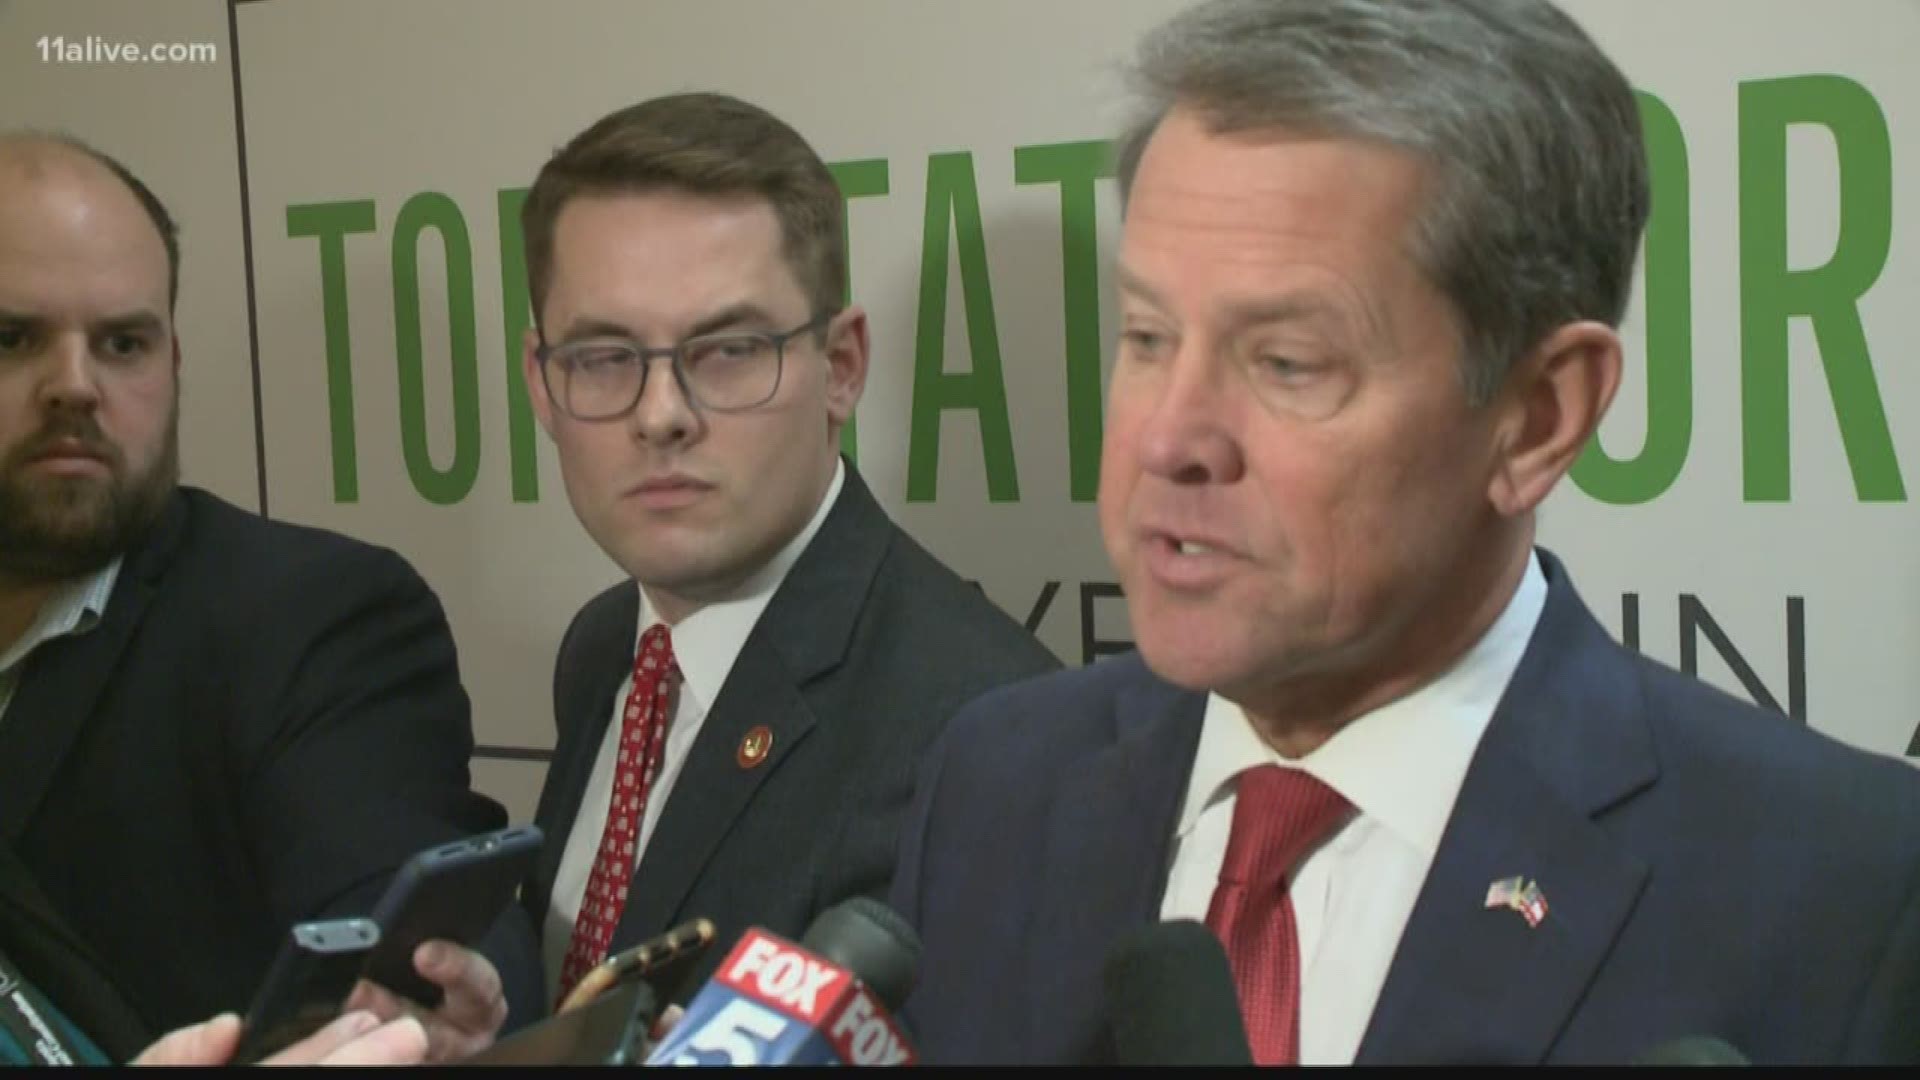 He hasn’t made the appointment, yet Gov. Brian Kemp is already getting second guessed for his upcoming appointment to fill Isakson's seat. He's stepping down Dec. 31